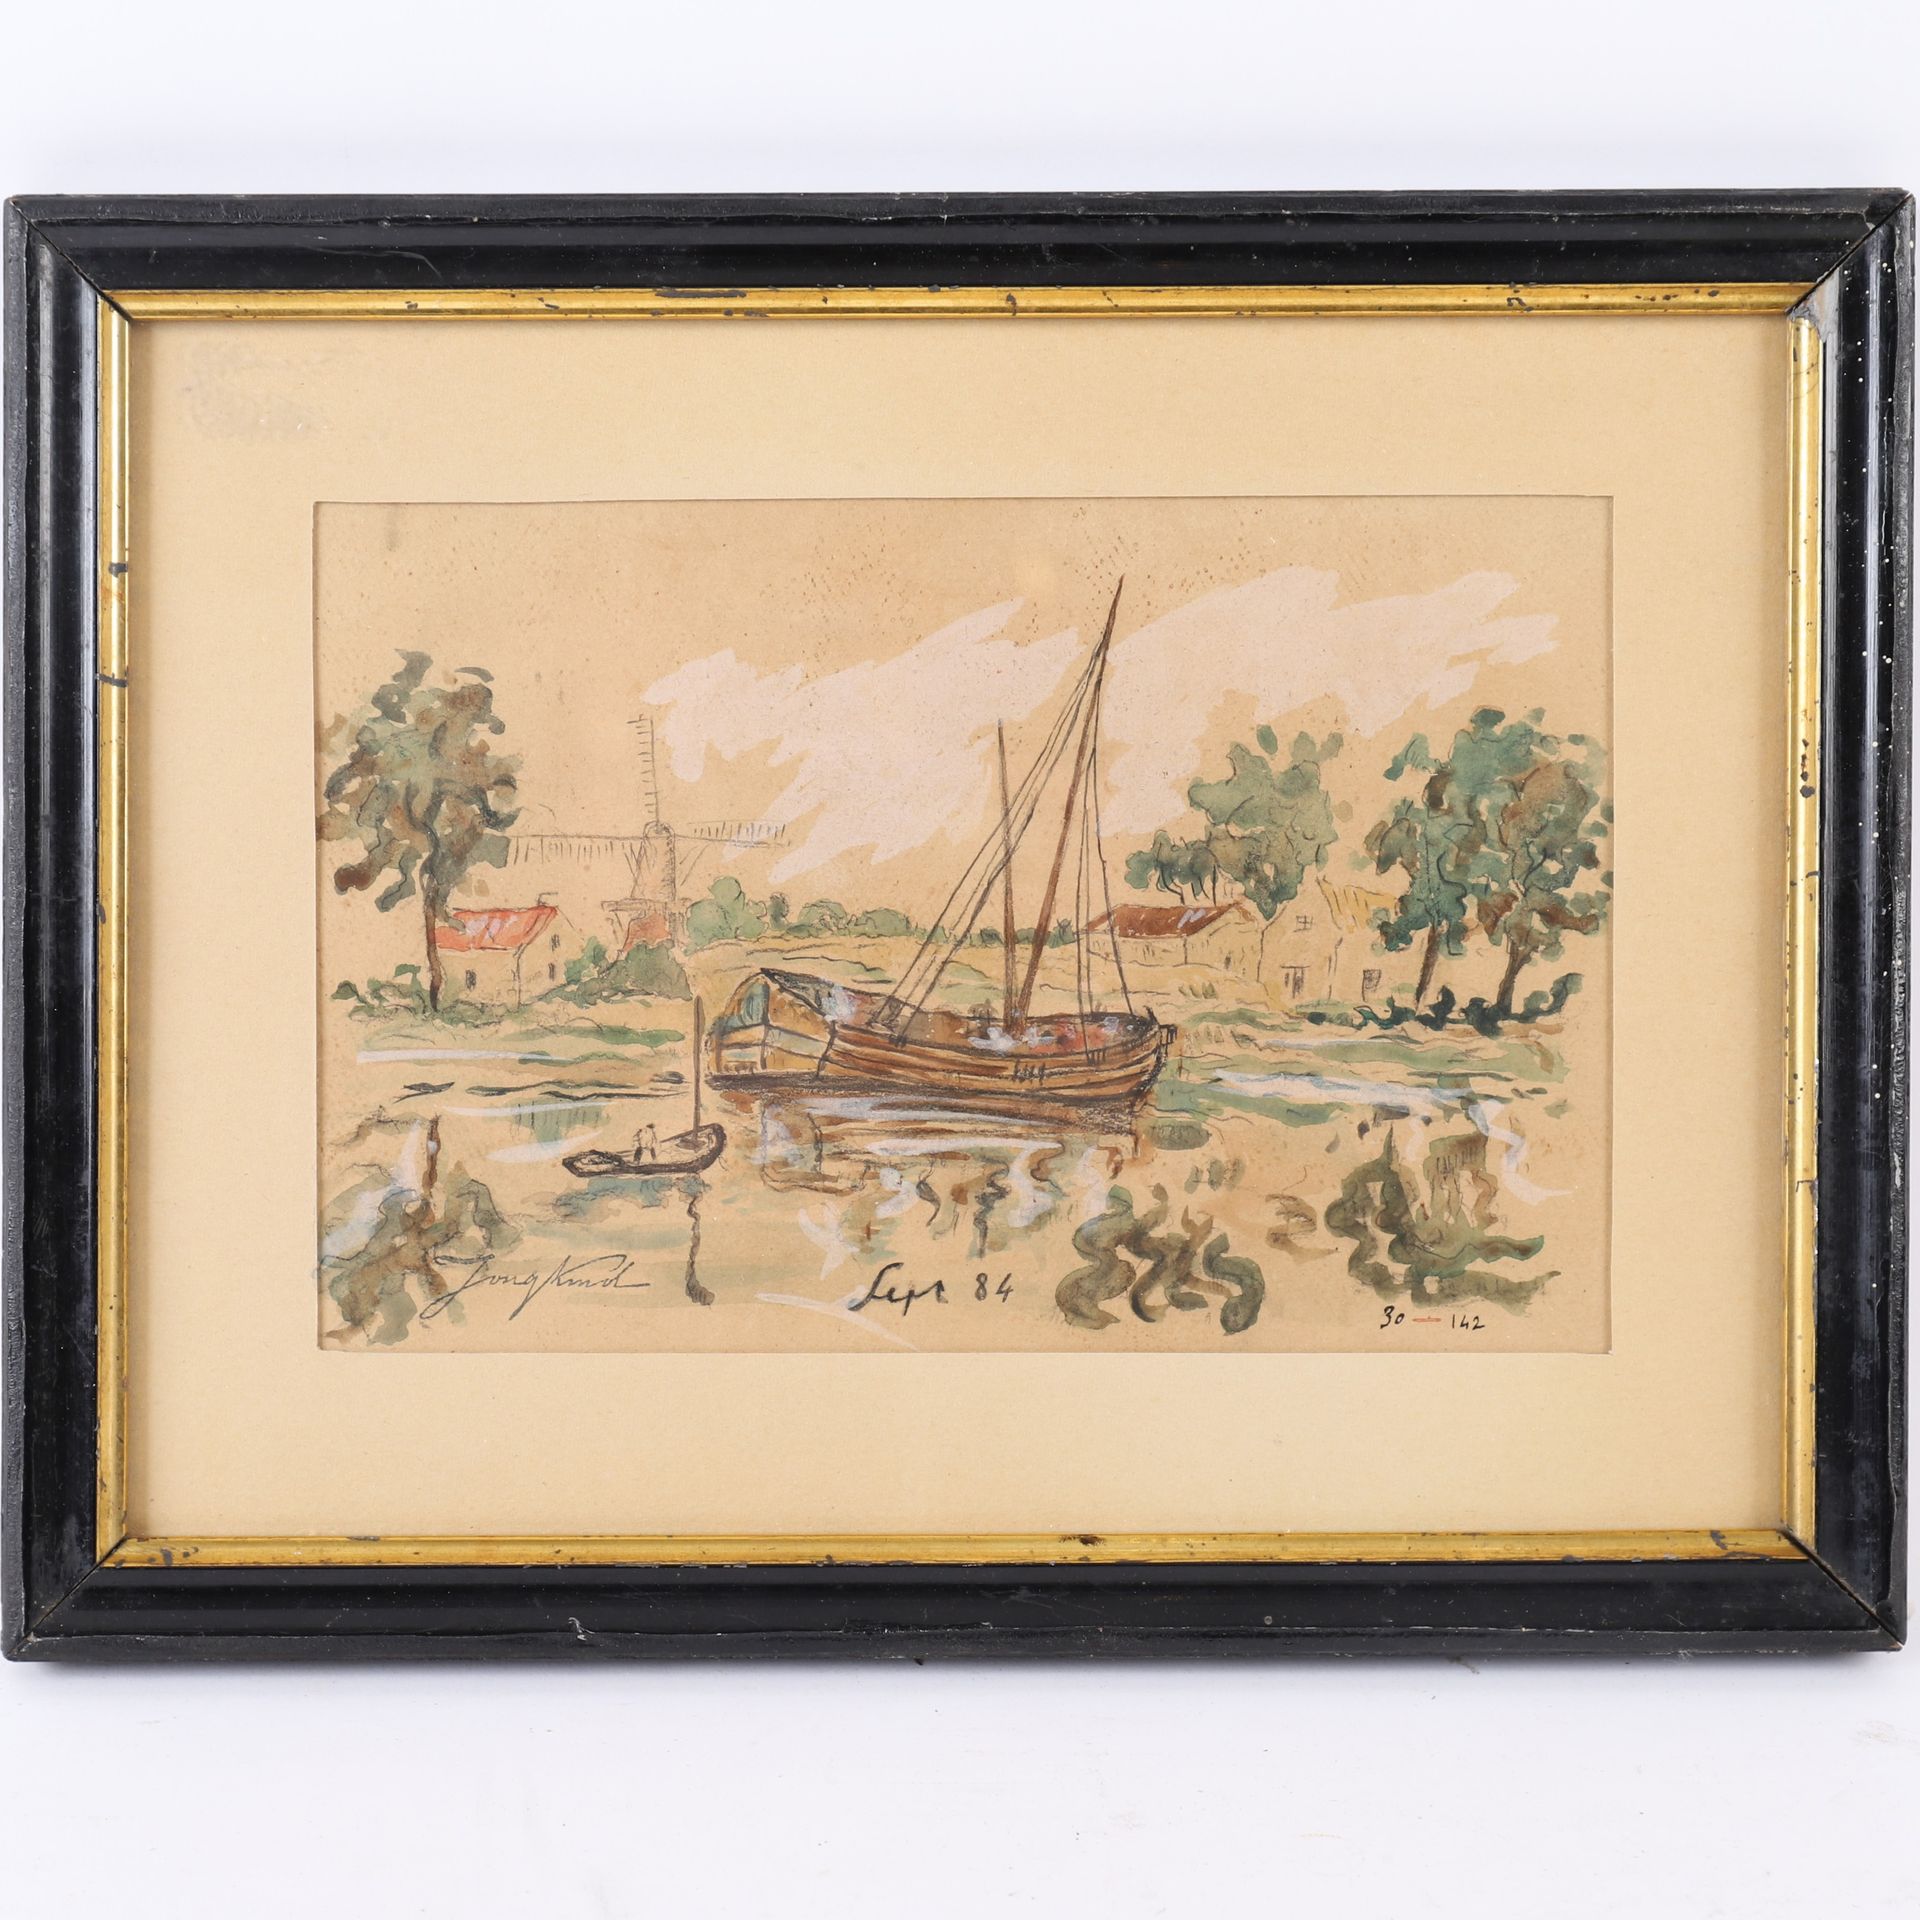 Null DRAWING "BY THE RIVER IN HOLLAND" by Johan Barthold JONGKIND (1819-1891)
Wa&hellip;